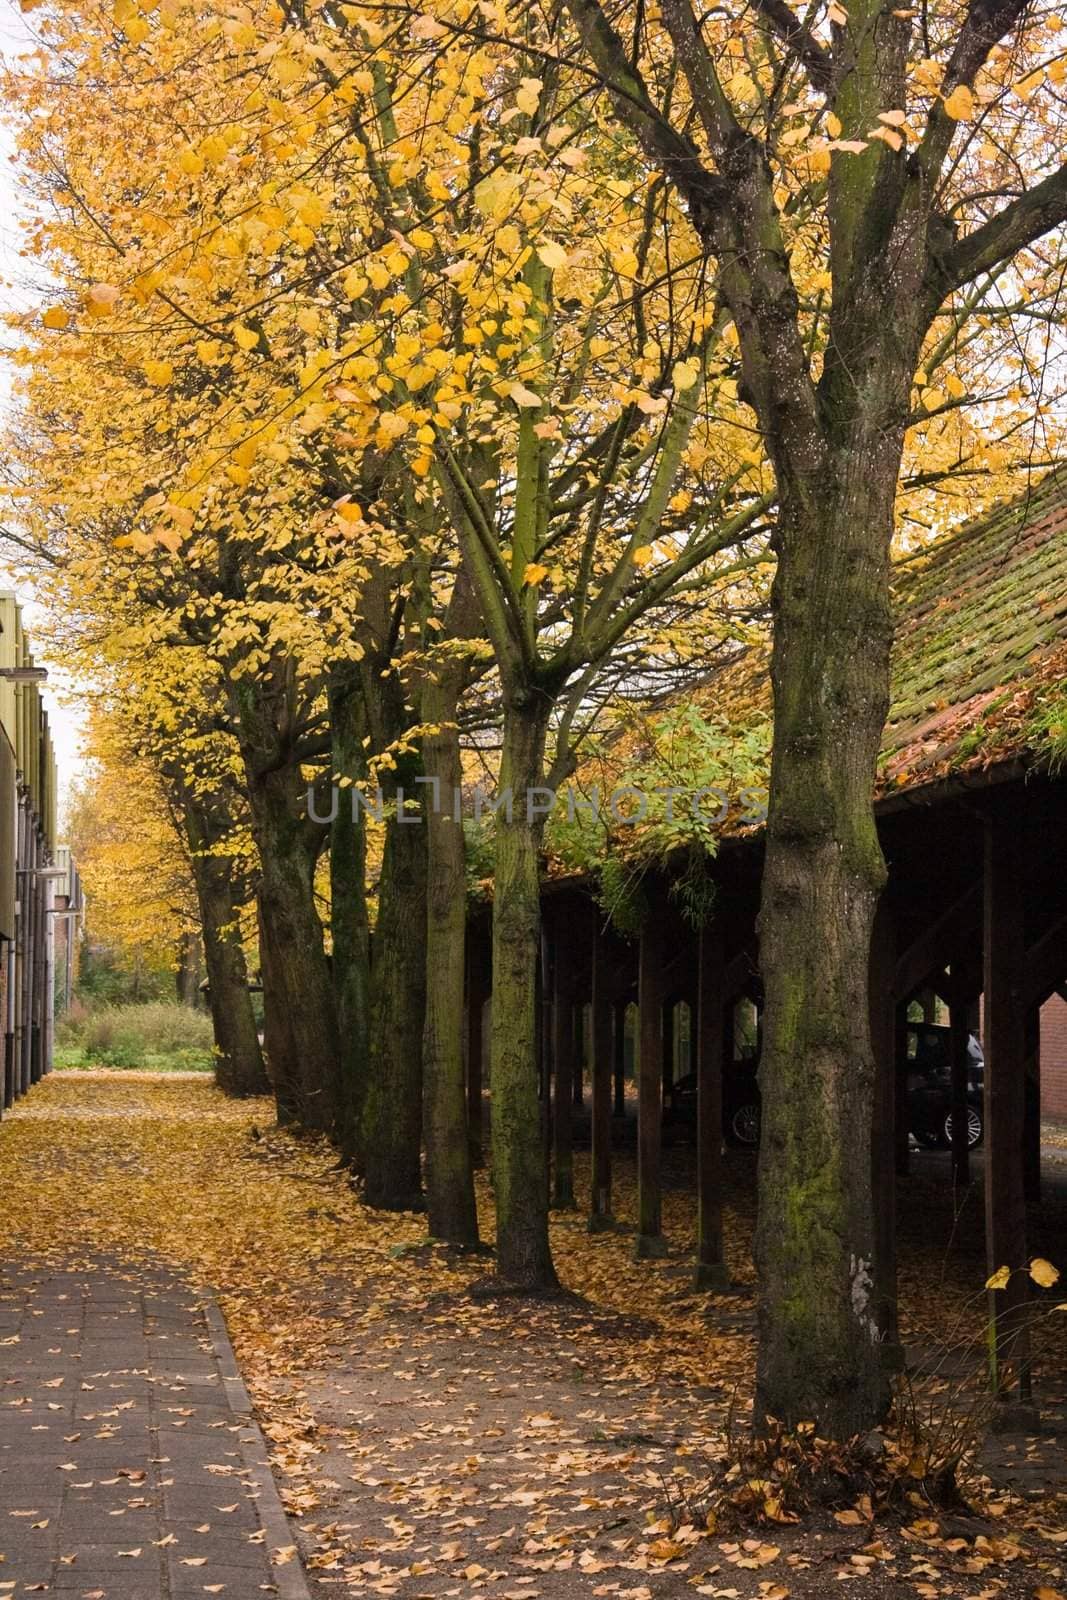 Autumn urban view with trees and old buildings